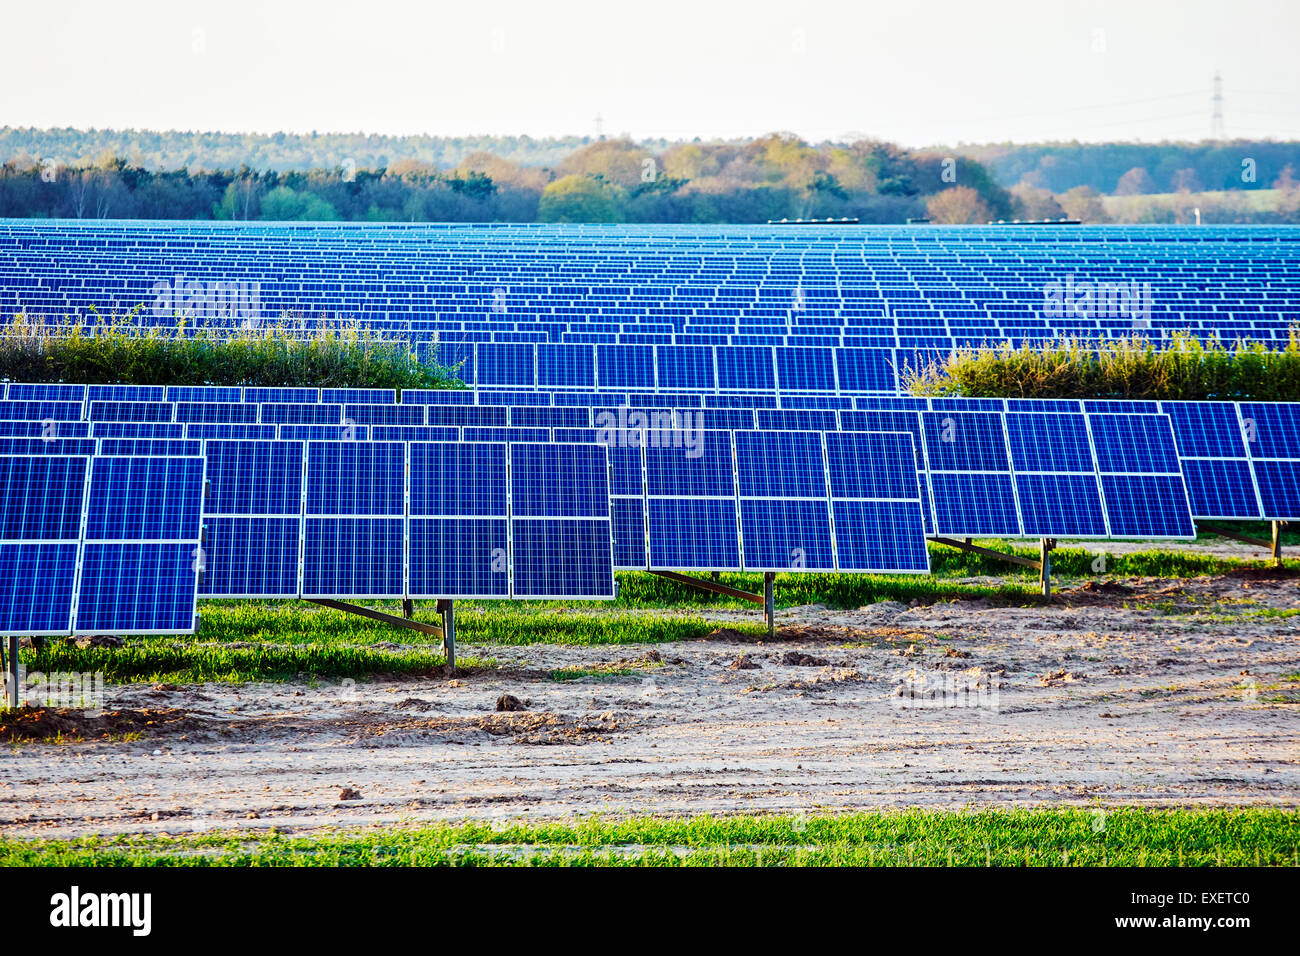 view of a solar power generation plant in a fileld in England Stock Photo